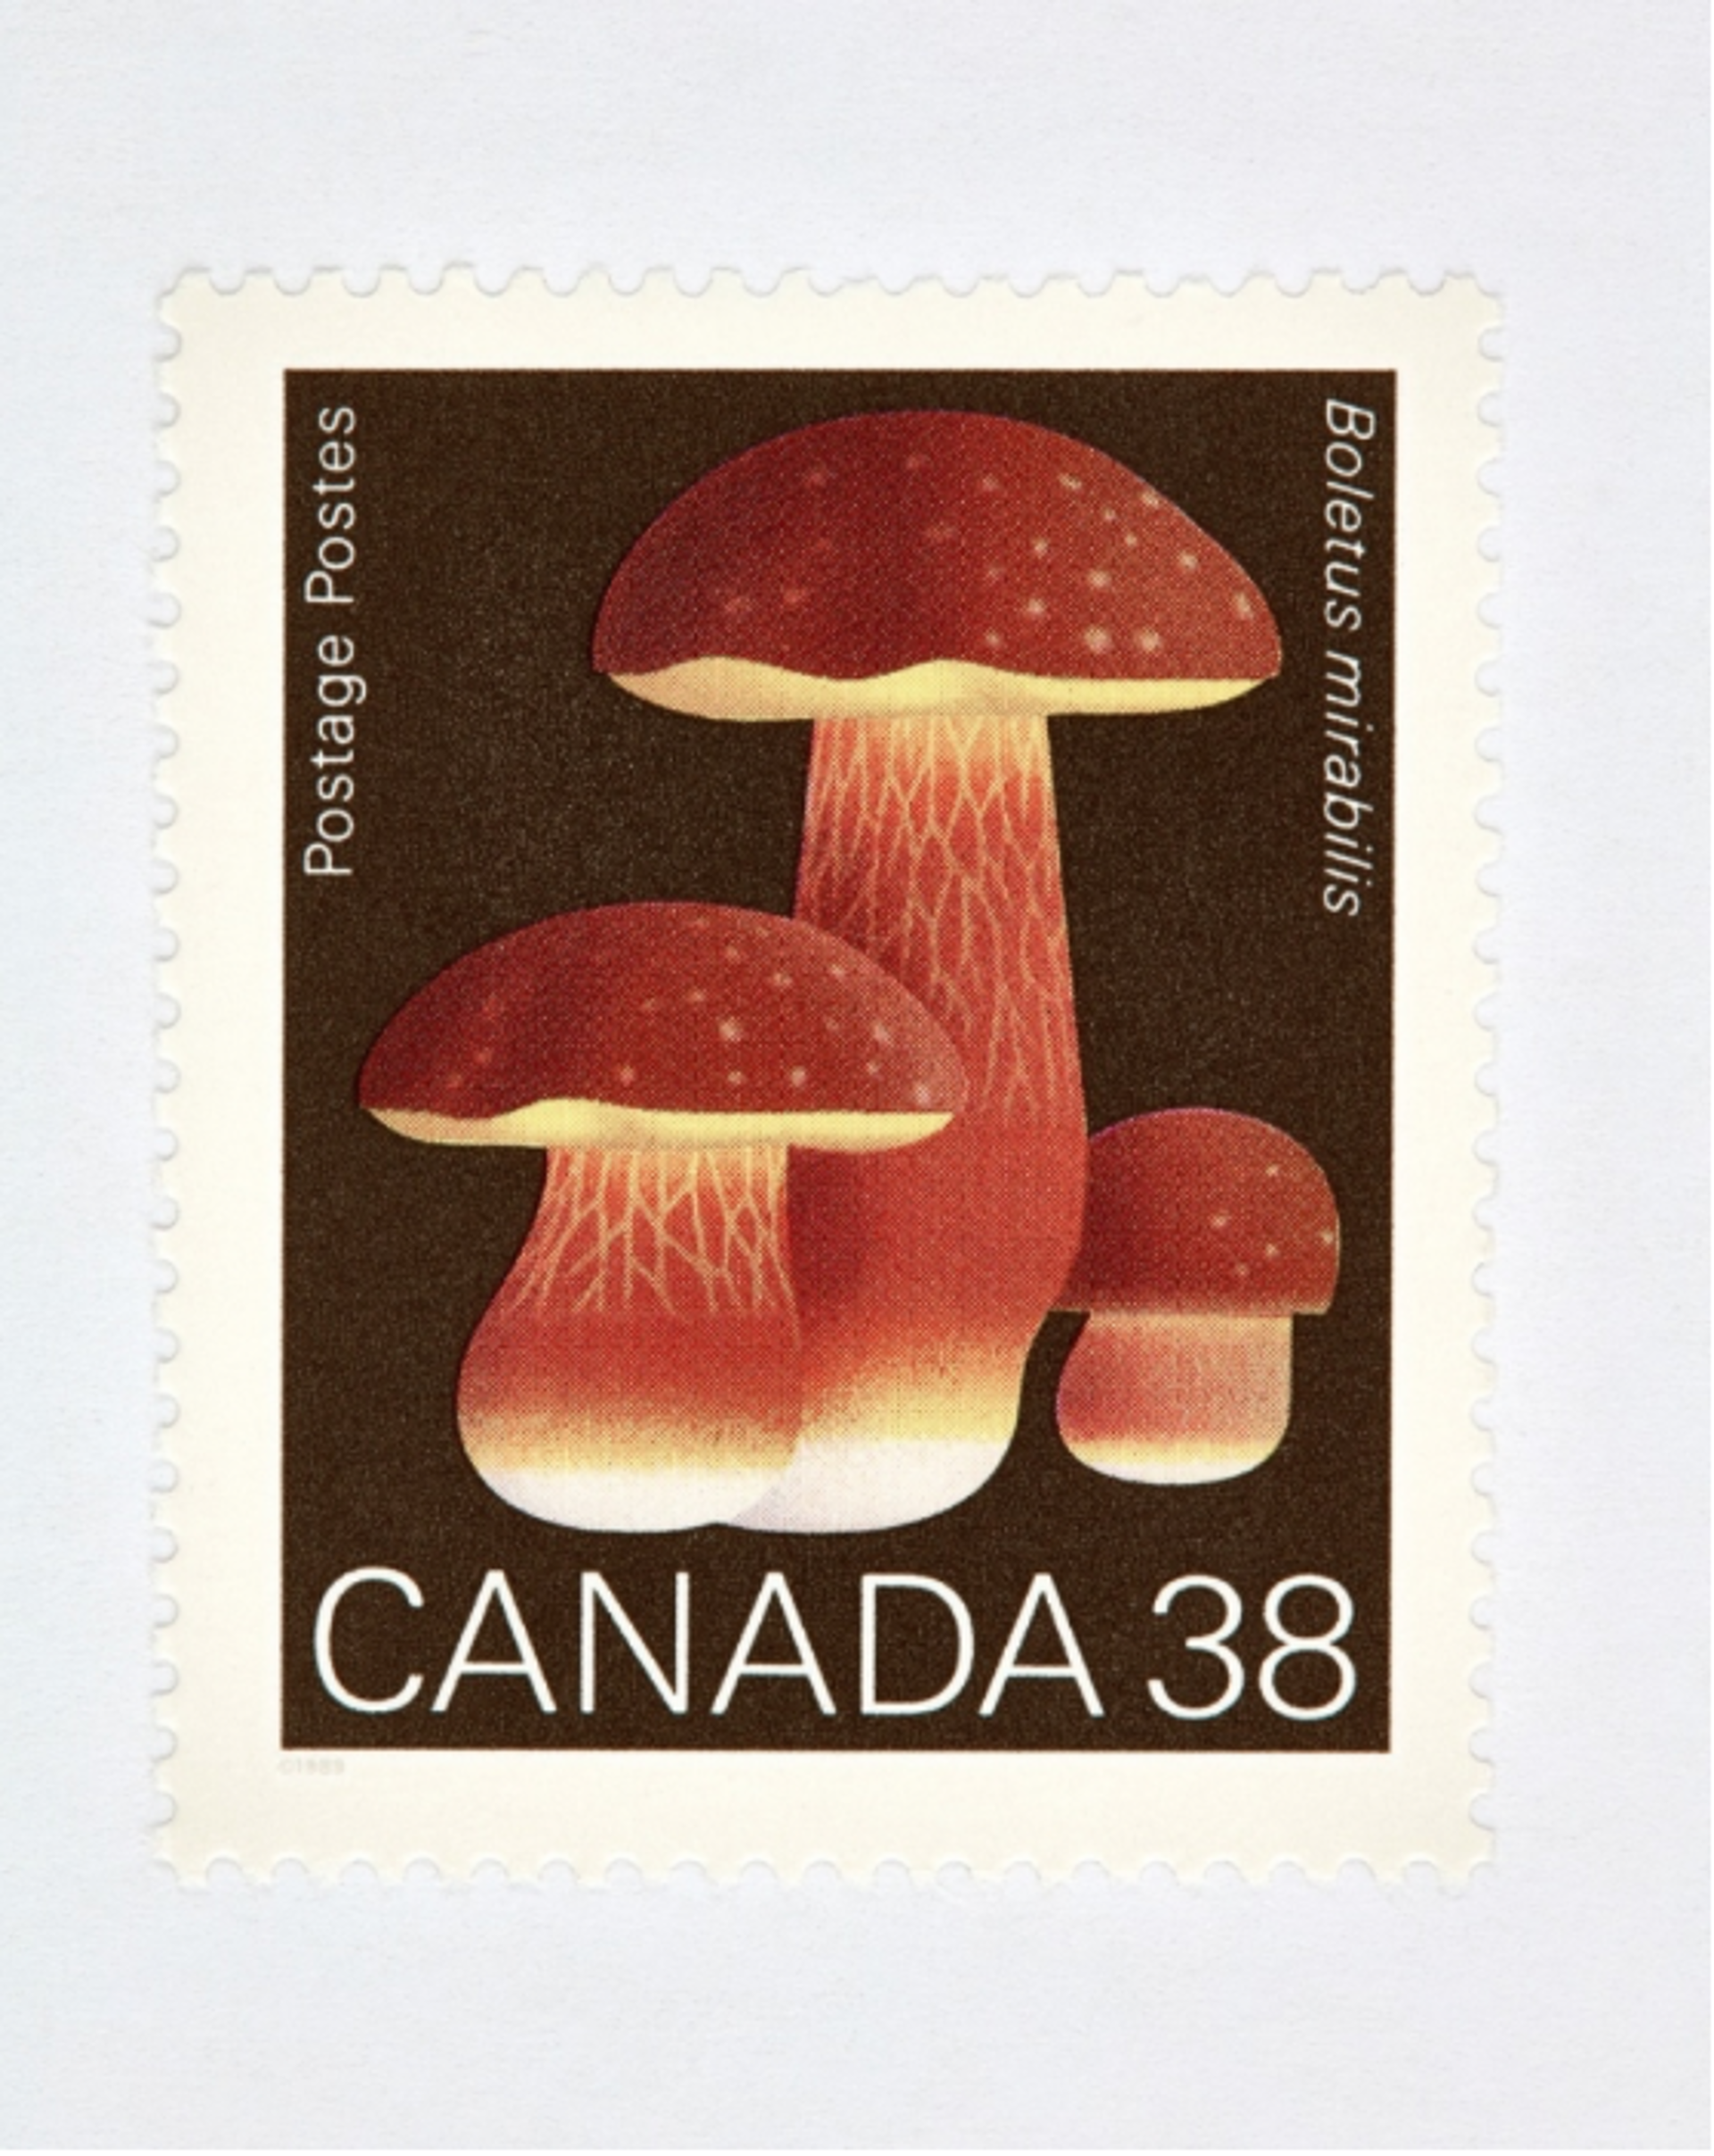 Canada 38 Mushroom (Brown) by Peter Andrew Lusztyk | Collectibles